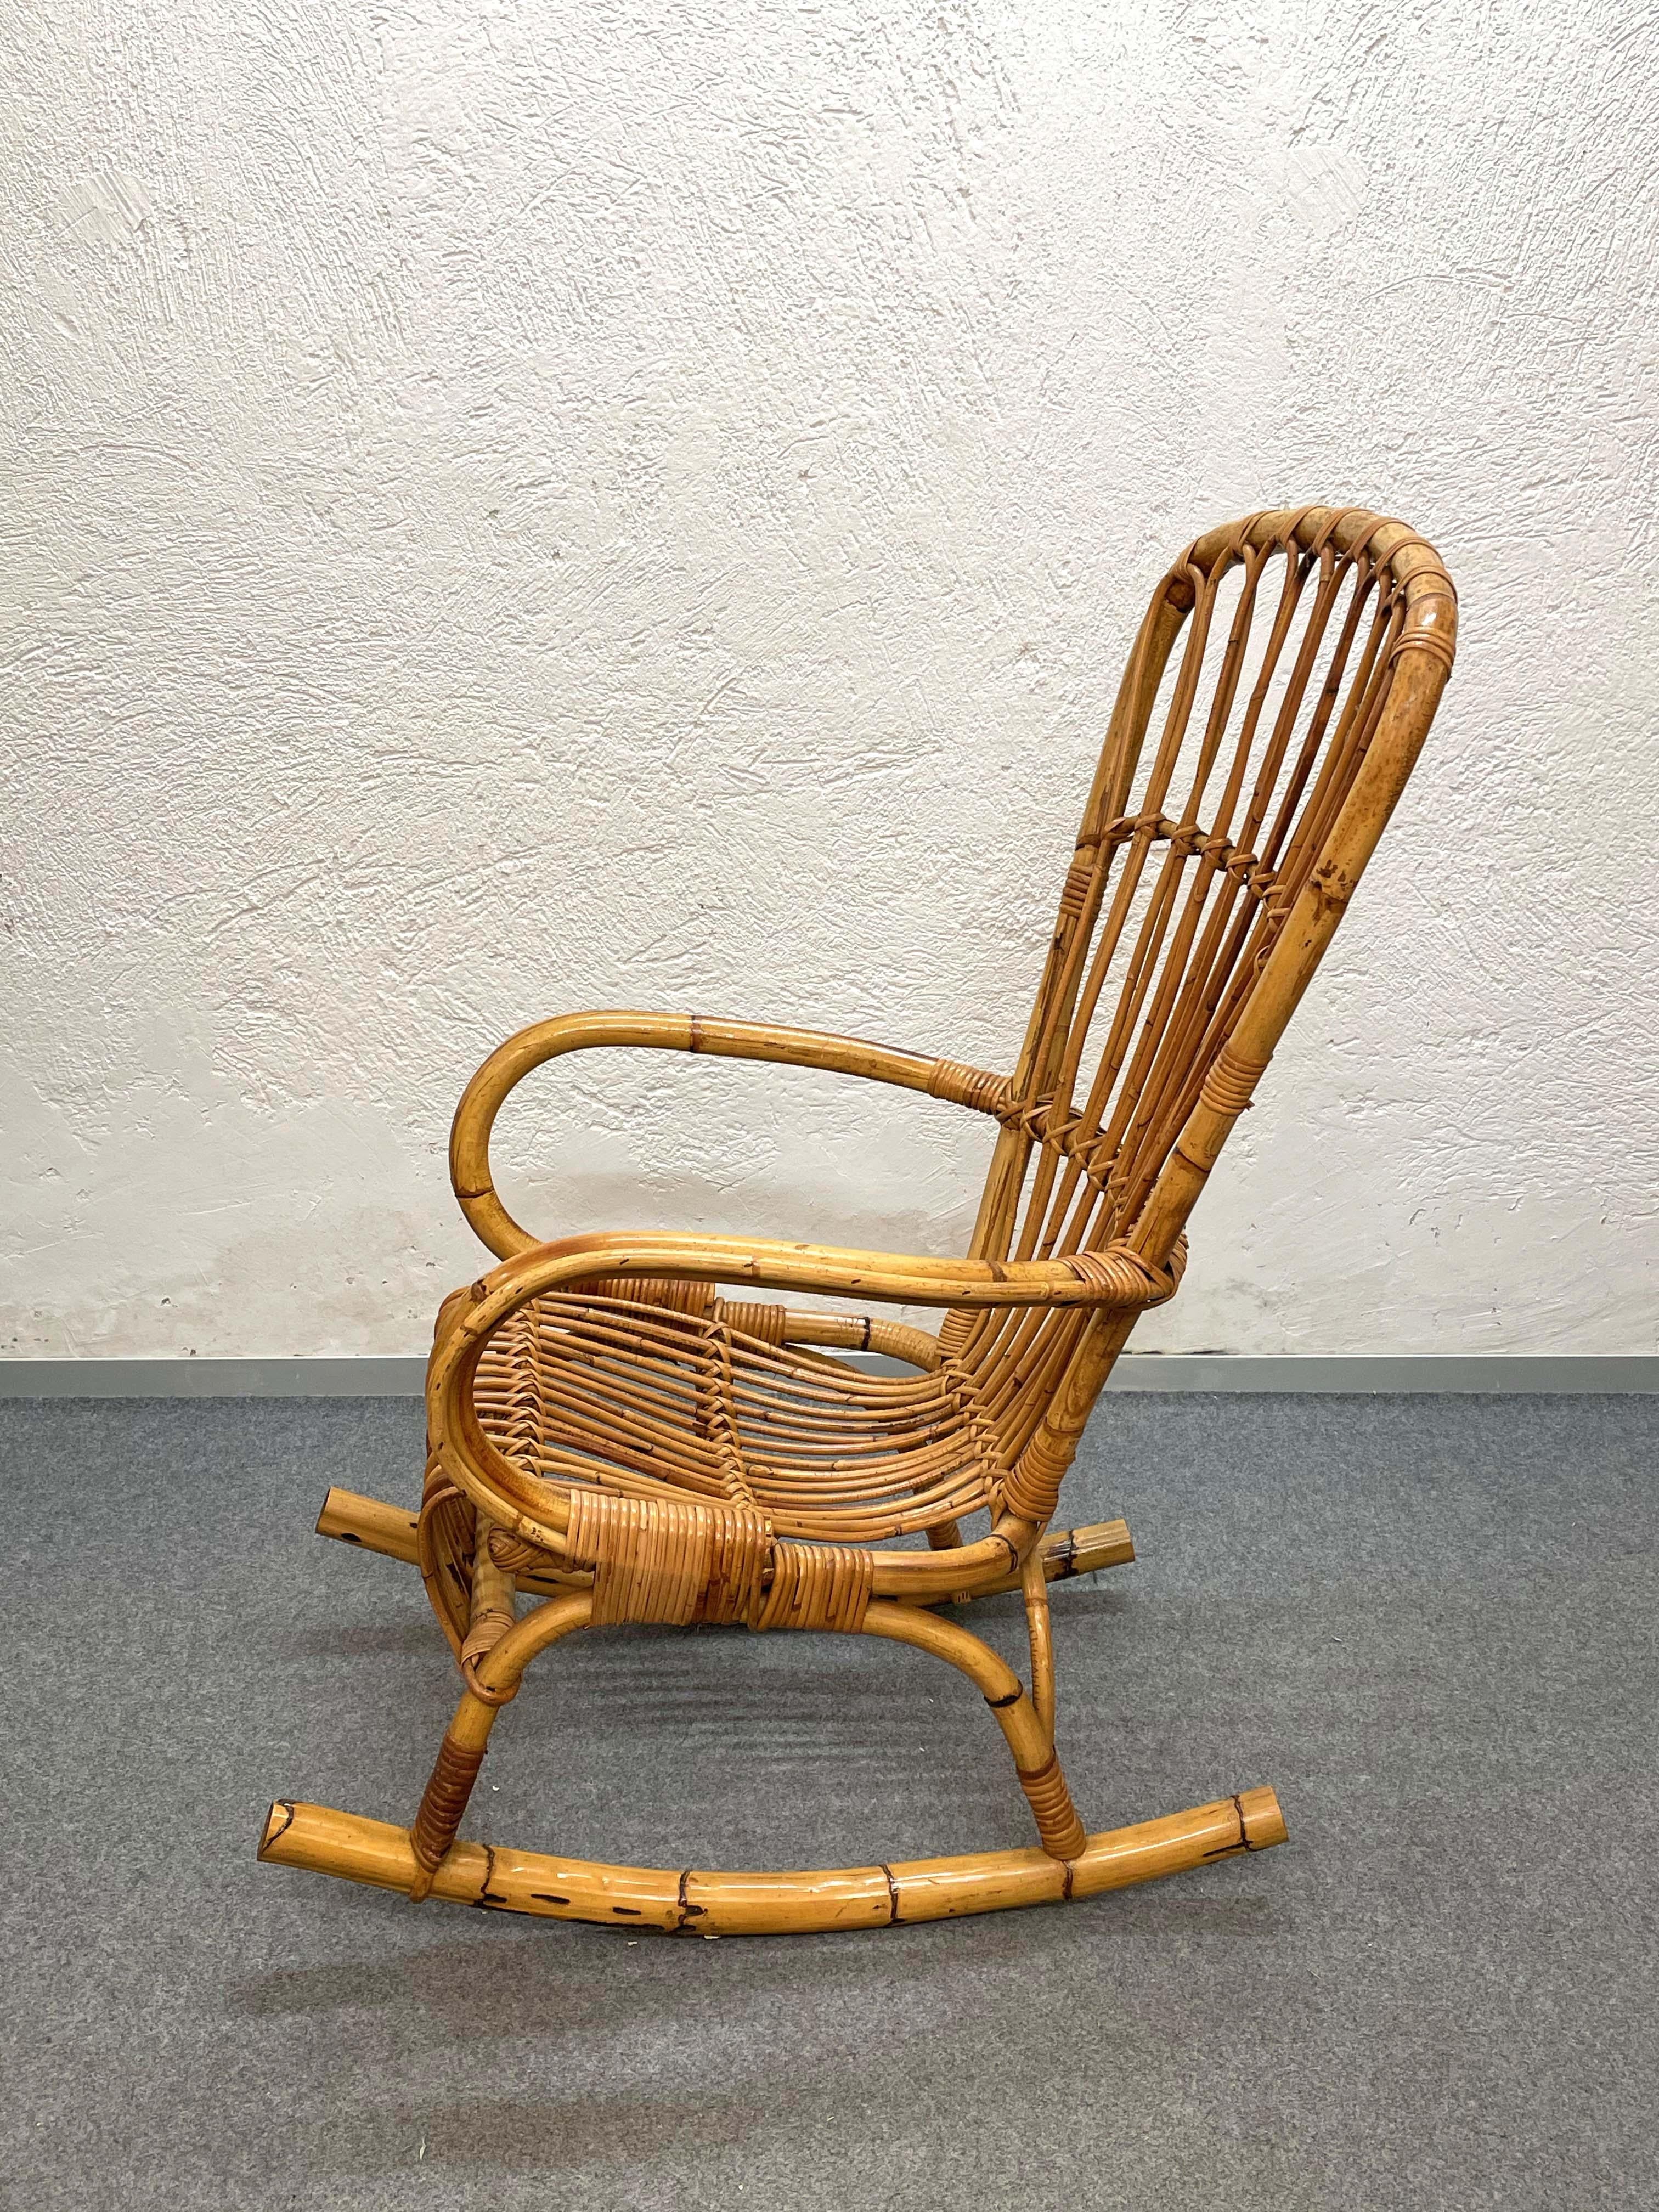 Midcentury French Riviera Rattan and Bamboo Italian Rocking Chair, 1960s For Sale 1